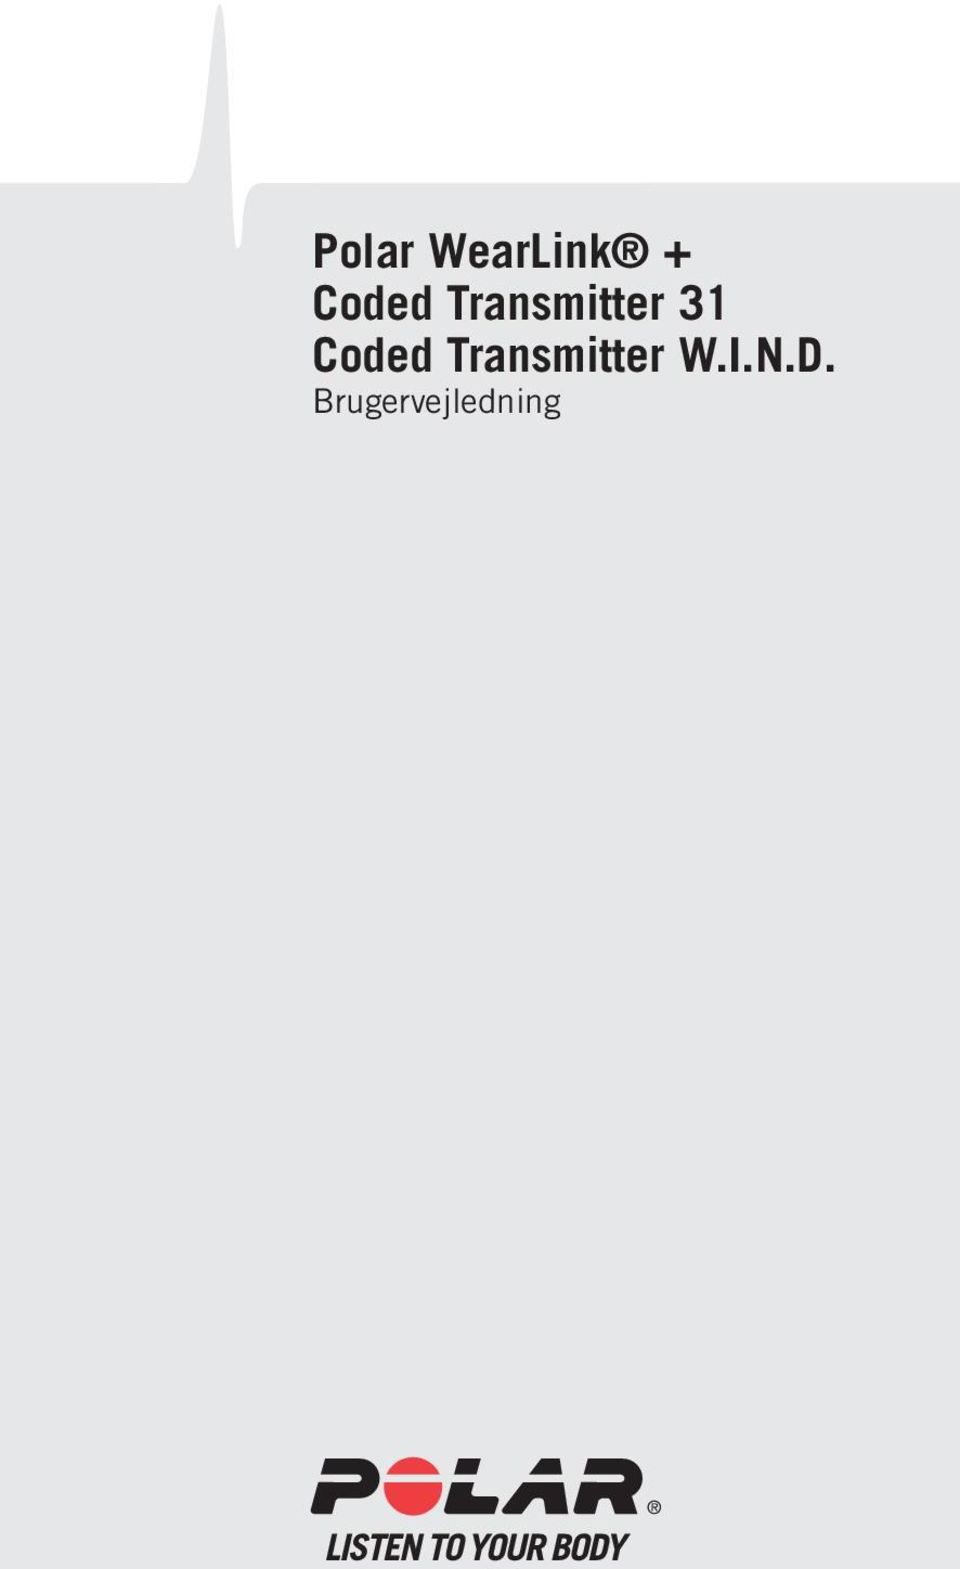 Coded Transmitter W.